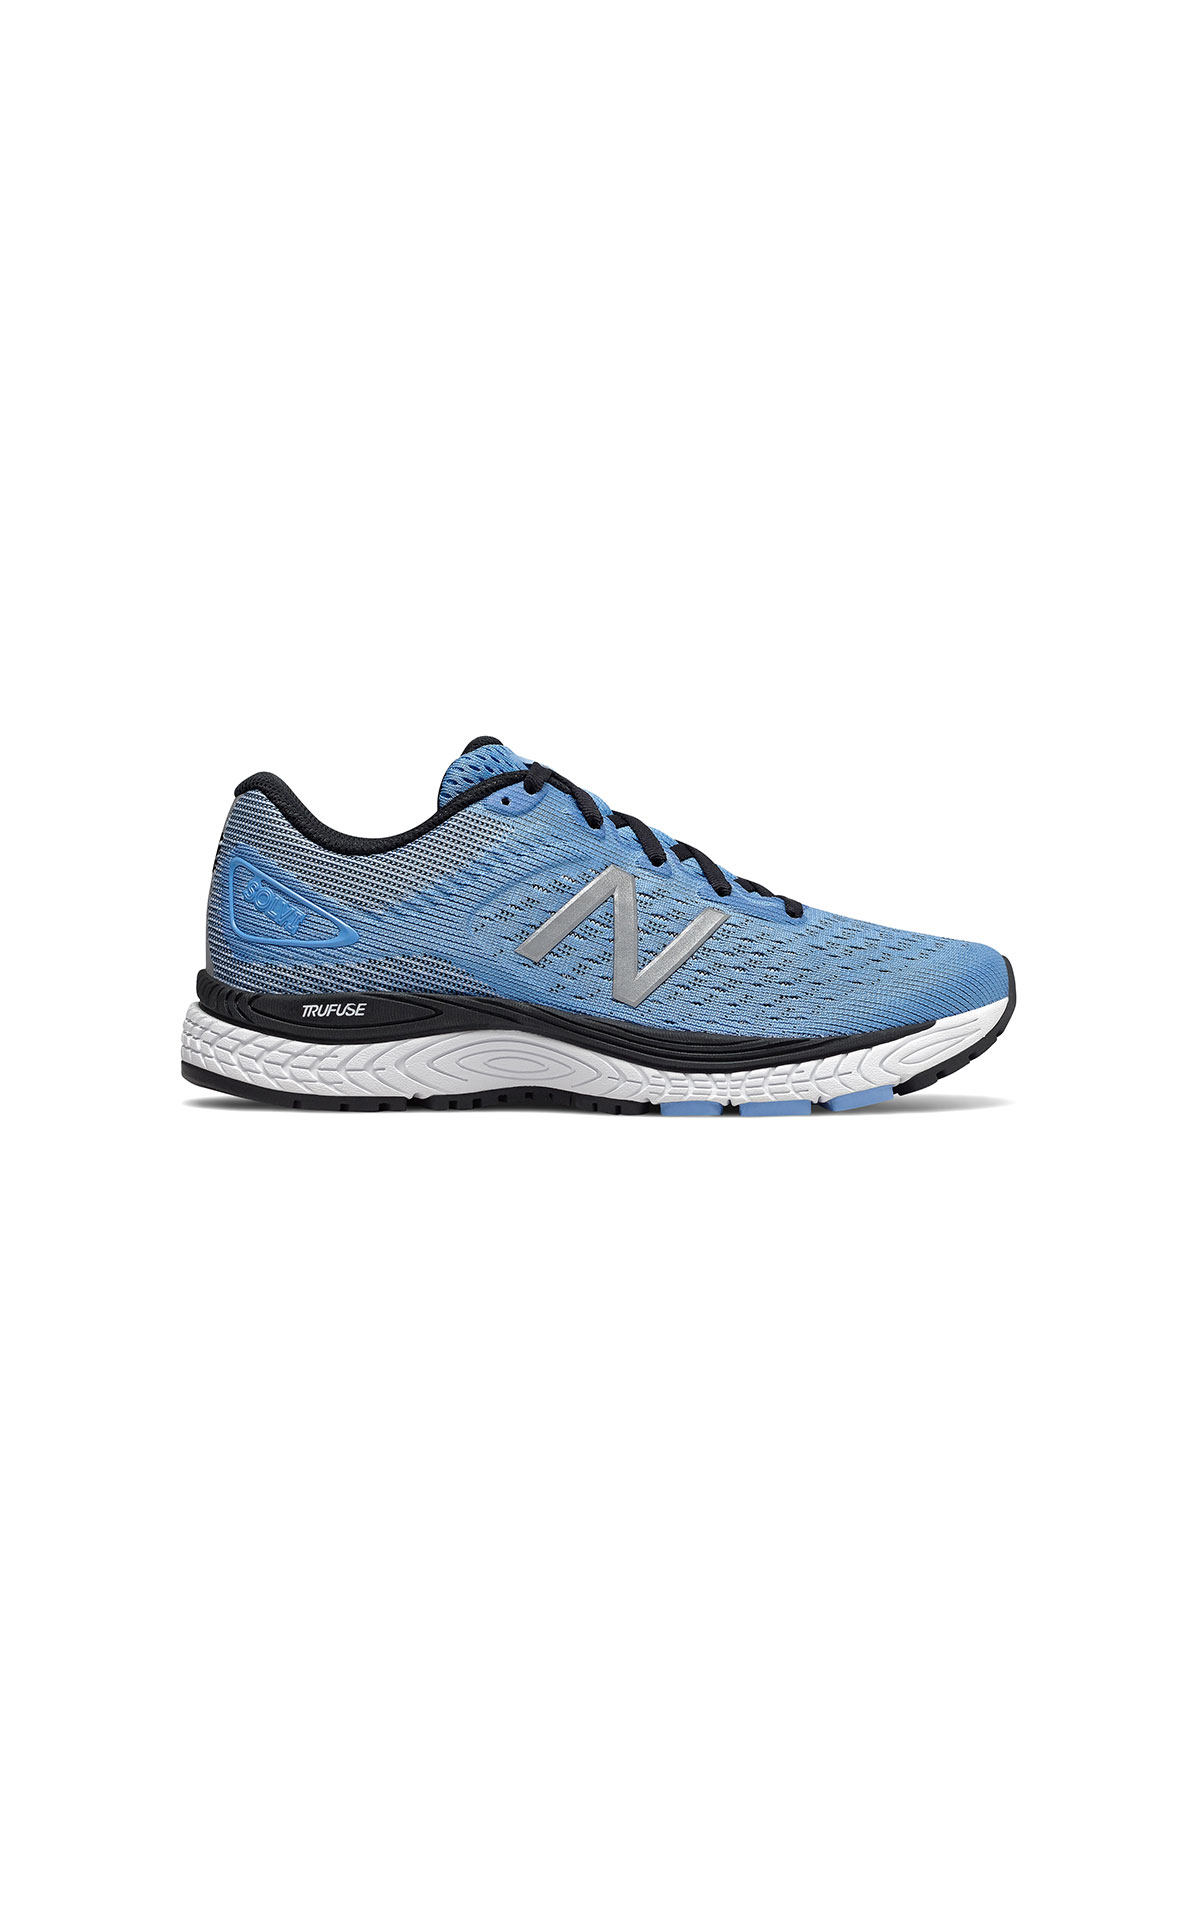 New Balance SOLVI V2 in blue at The Bicester Village Shopping Collection